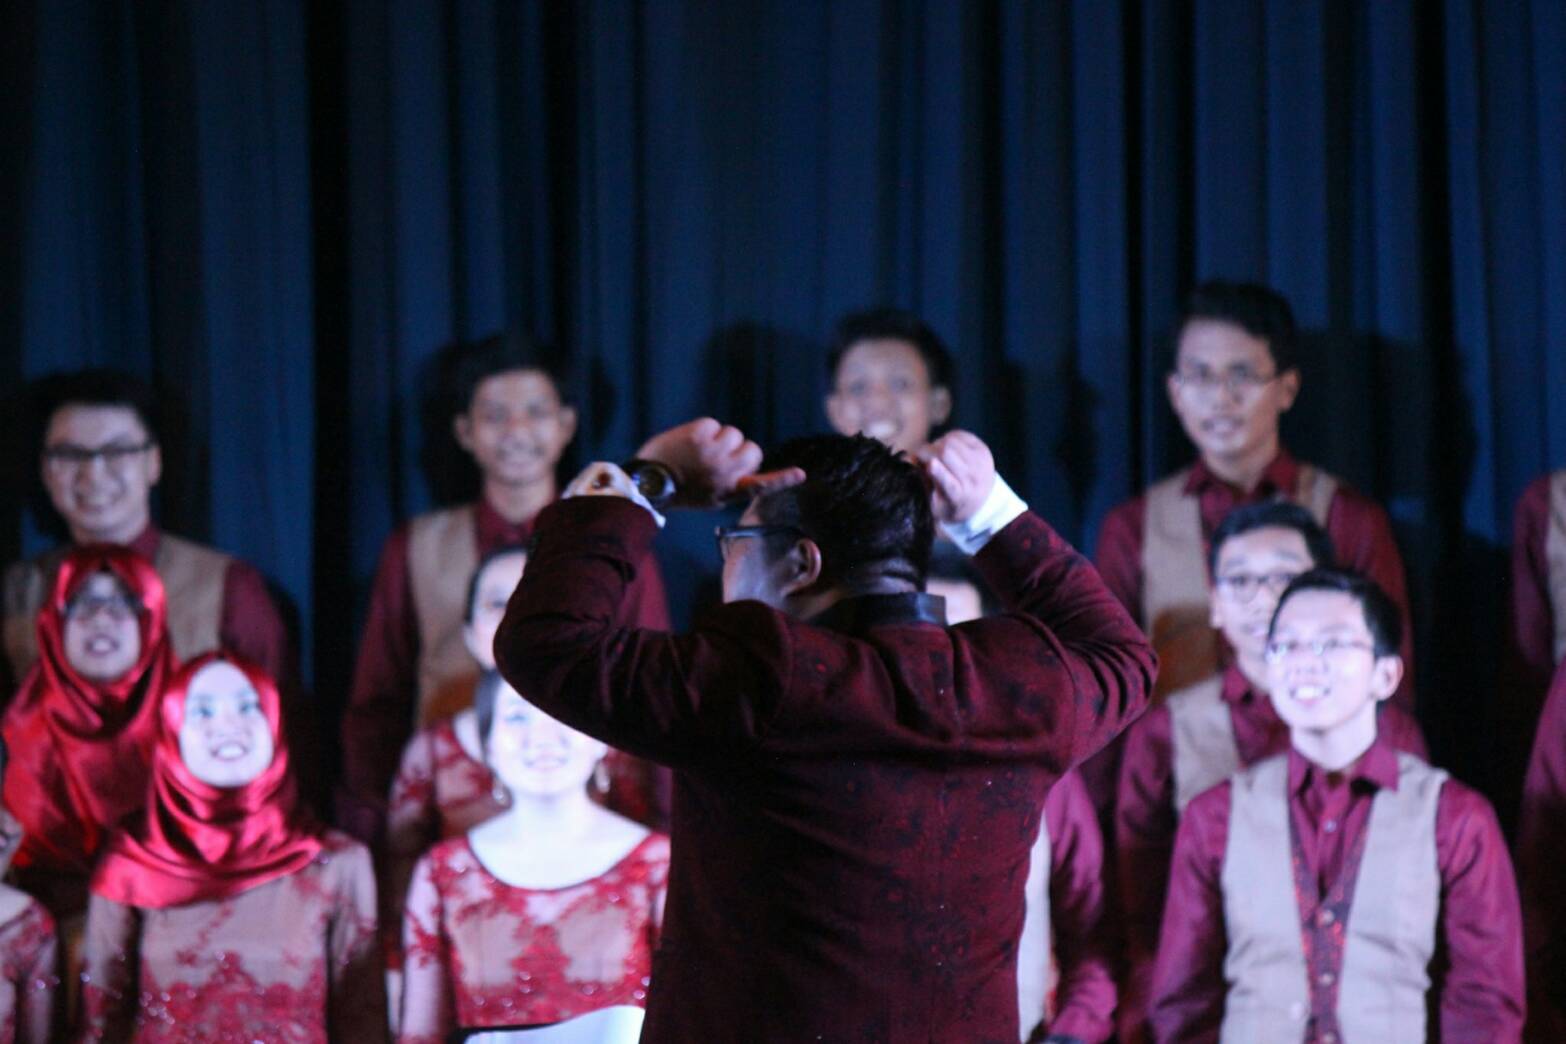 luminuous-concert-psm-itb-illuminate-the-light-of-talent-and-effort-with-voice